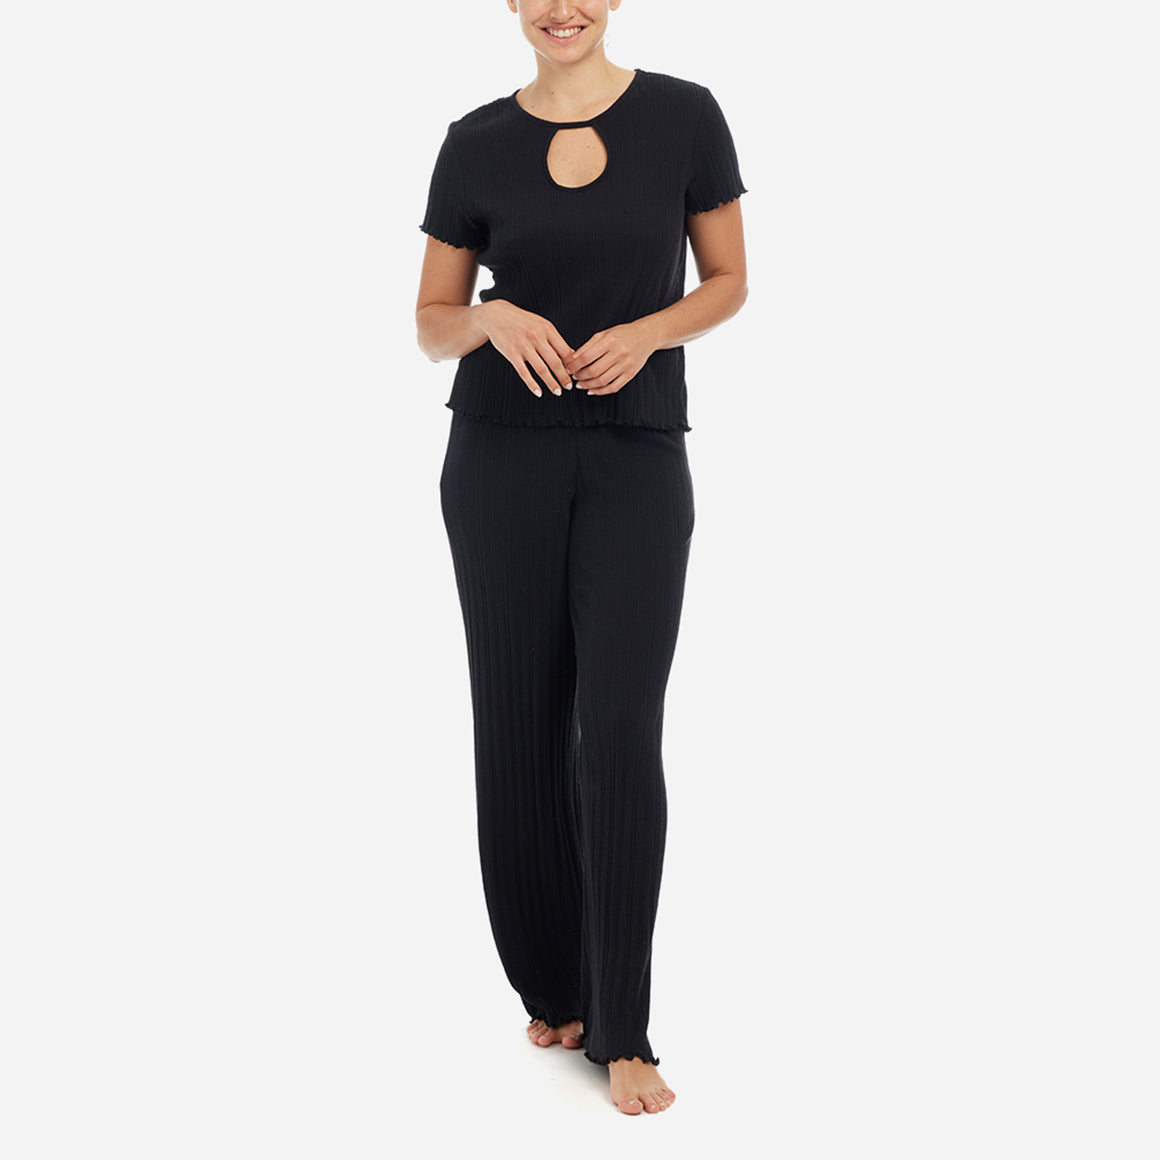 The Ravena Lounge Set has a relaxed-fit that features delicate trim details like a flattering keyhole opening and ruffled edges. The matching pants have convenient side pockets and a comfortable elastic waistband for a personalized fit, allowing you to move freely and unrestricted.